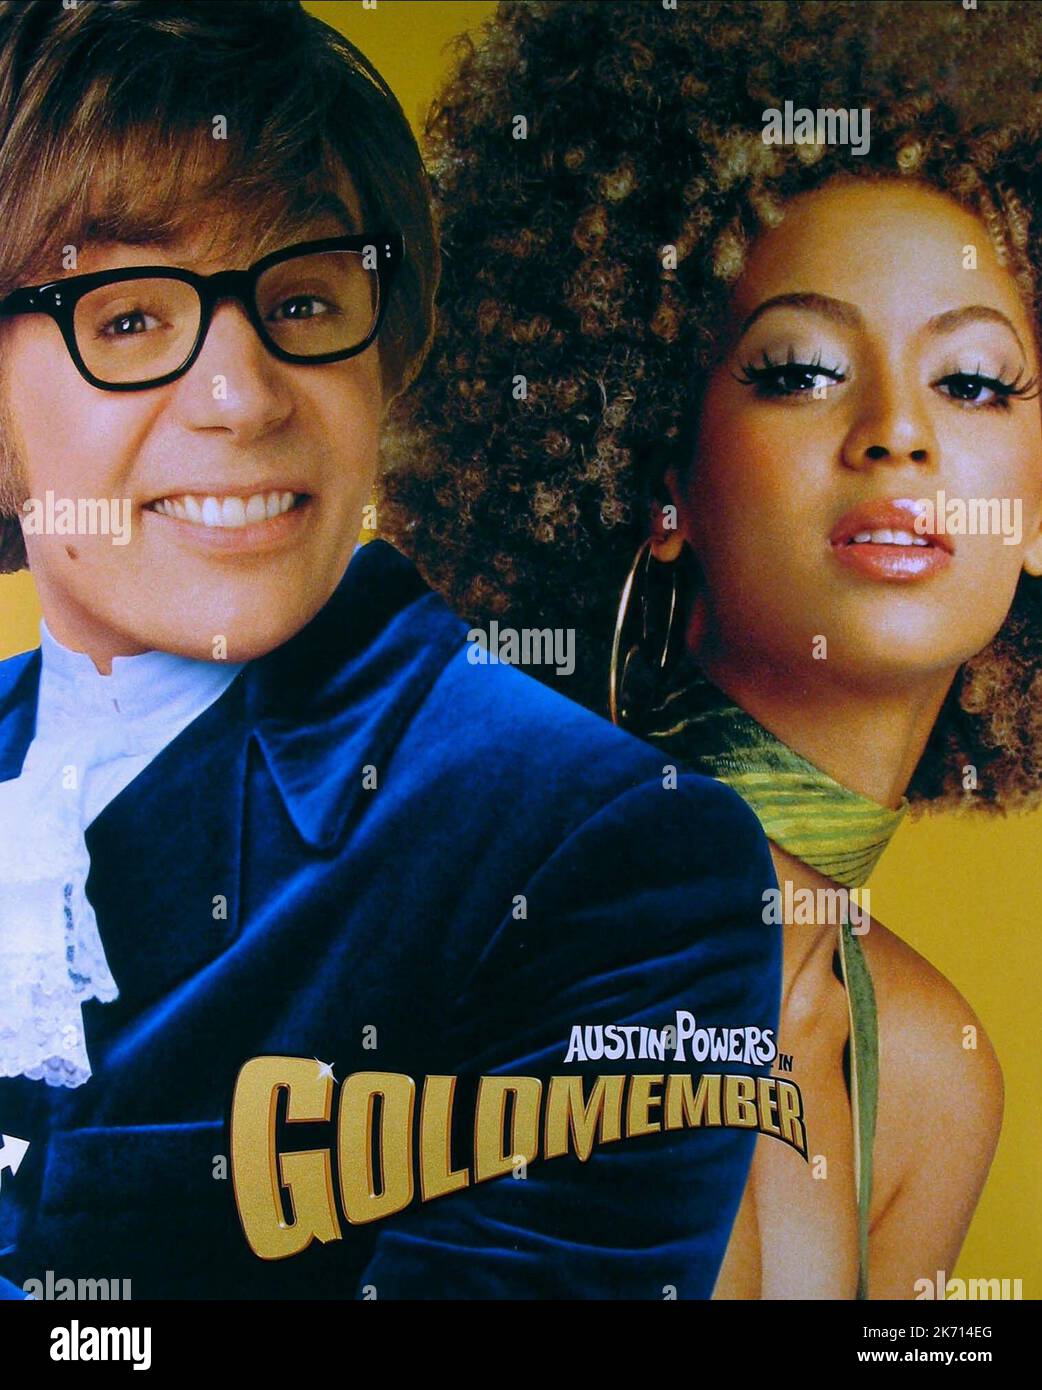 MIKE MYERS, BEYONCE KNOWLES, AUSTIN POWERS IN GOLDMEMBER, 2002 Stock Photo